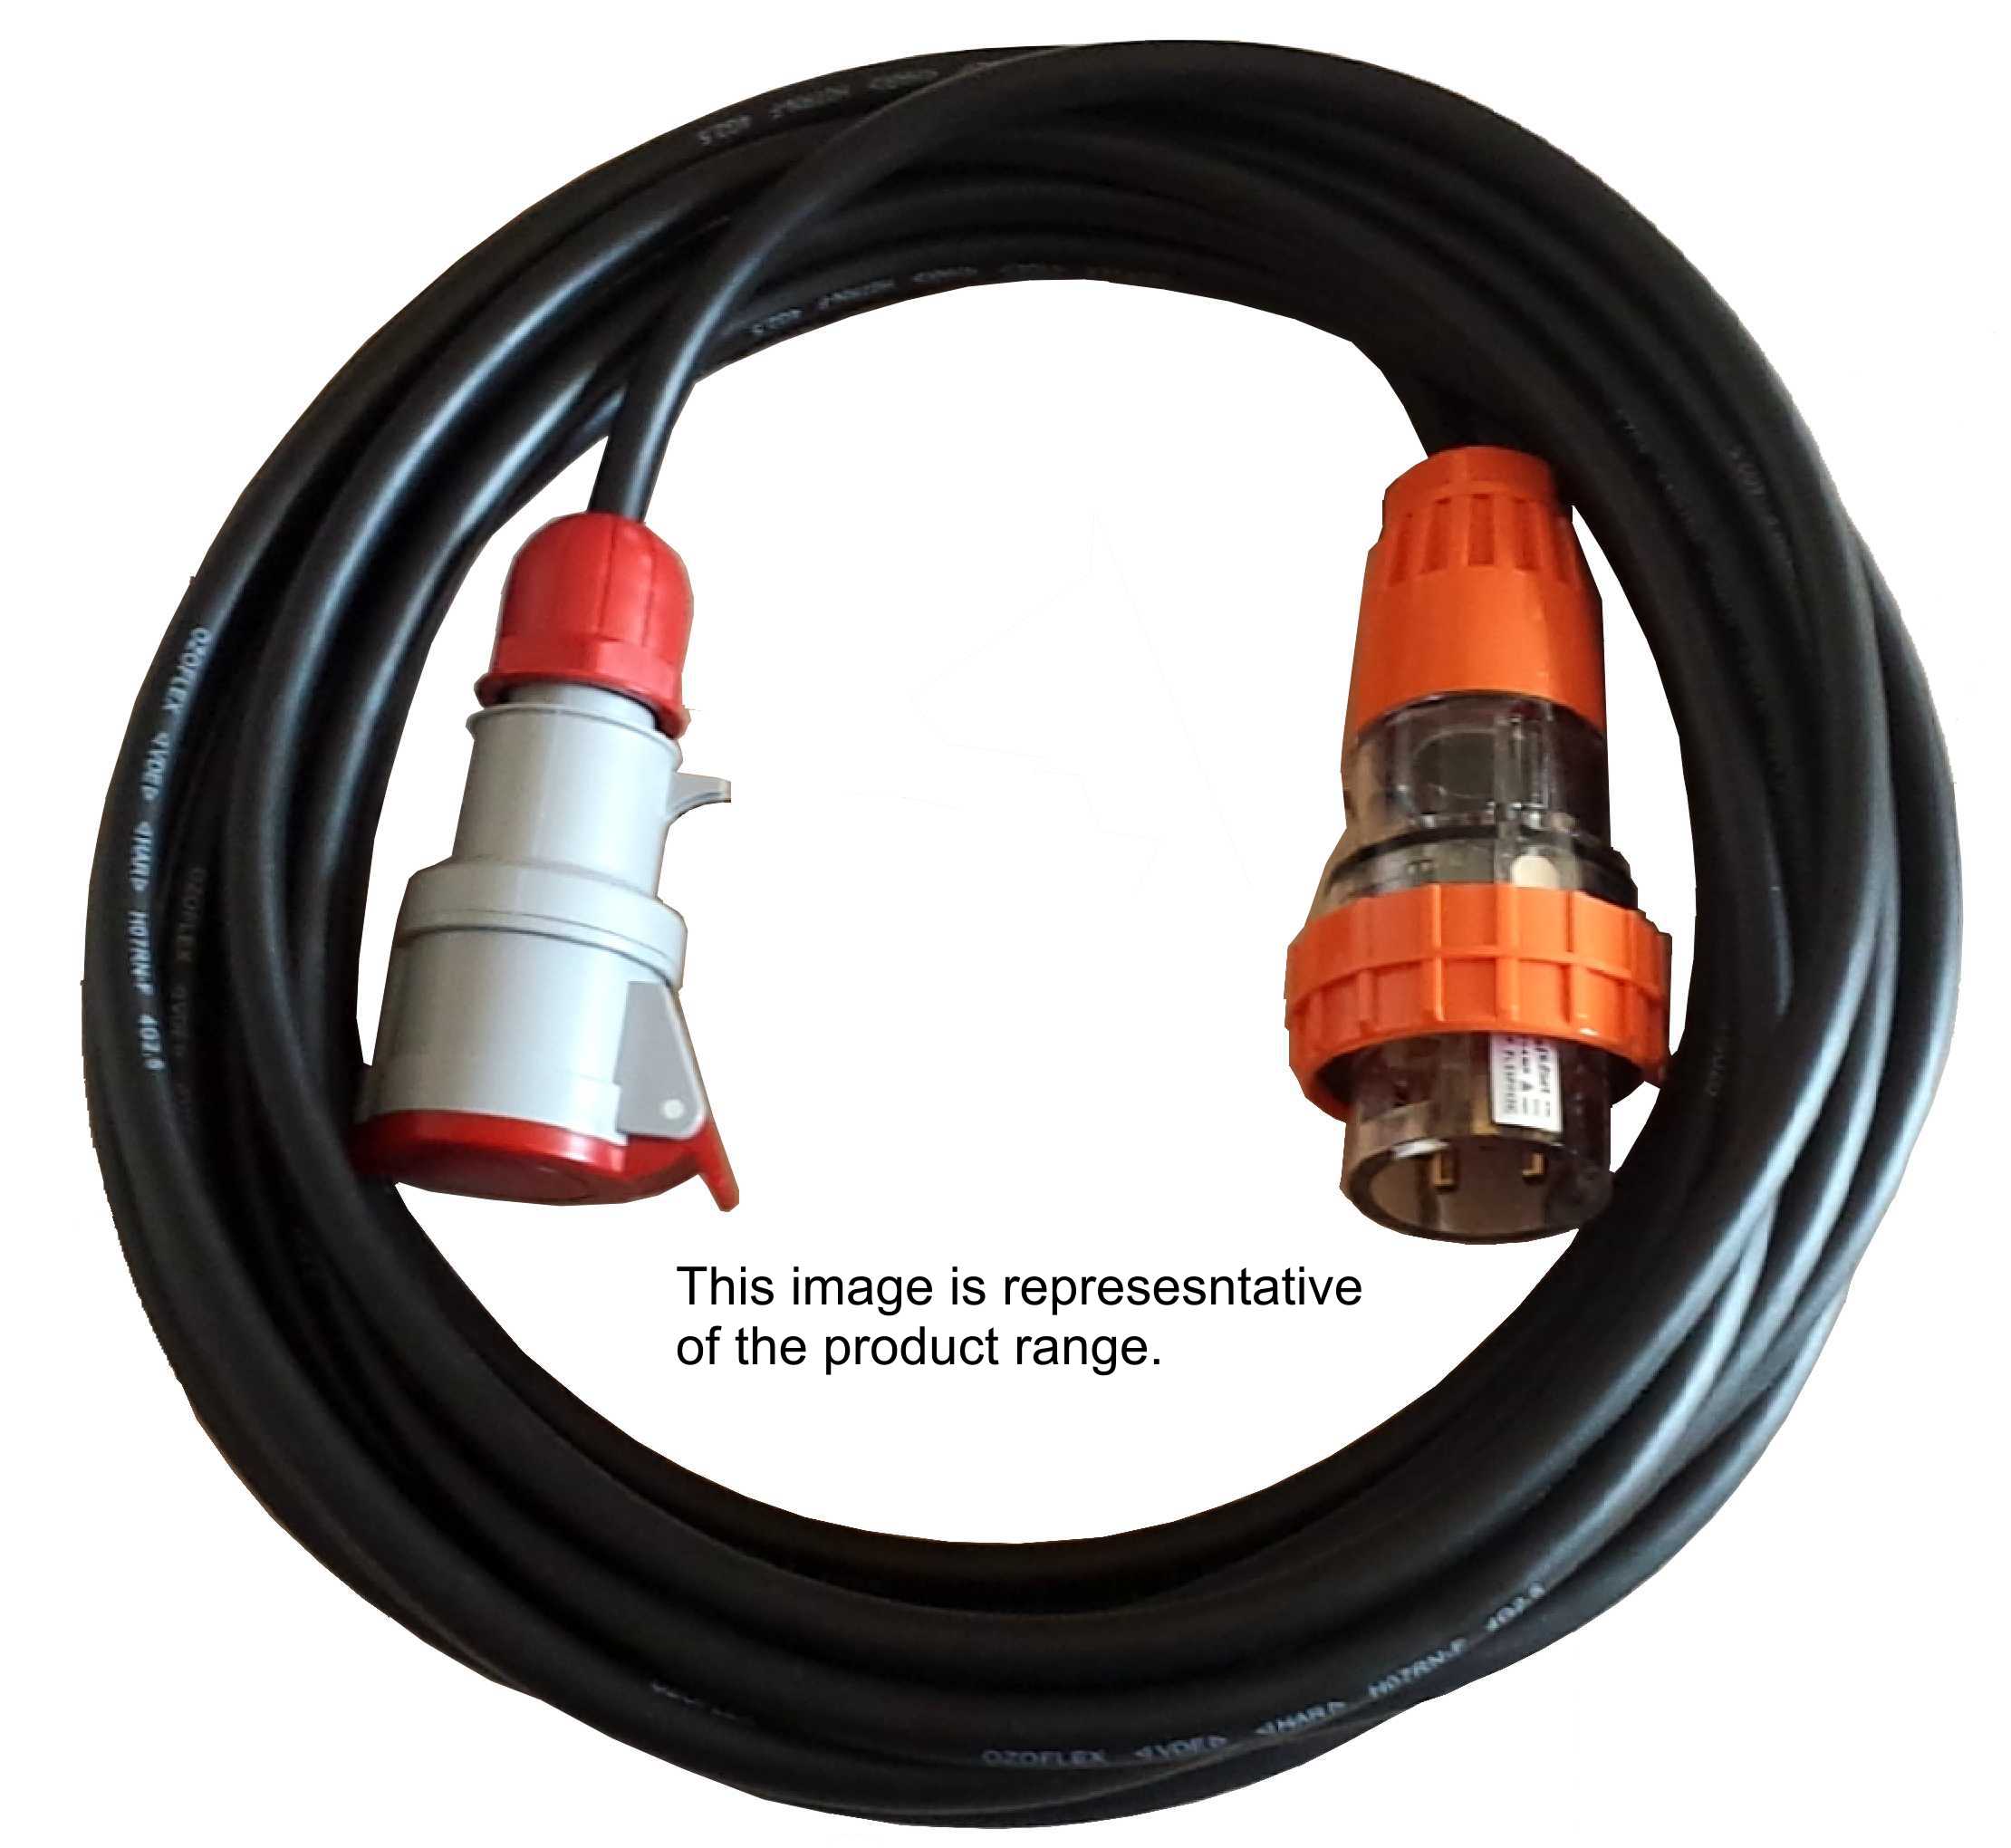 Cable CSA:1.5mm². 3 Phase,4 pin,415V 10 Amp 5m Appliance Lead